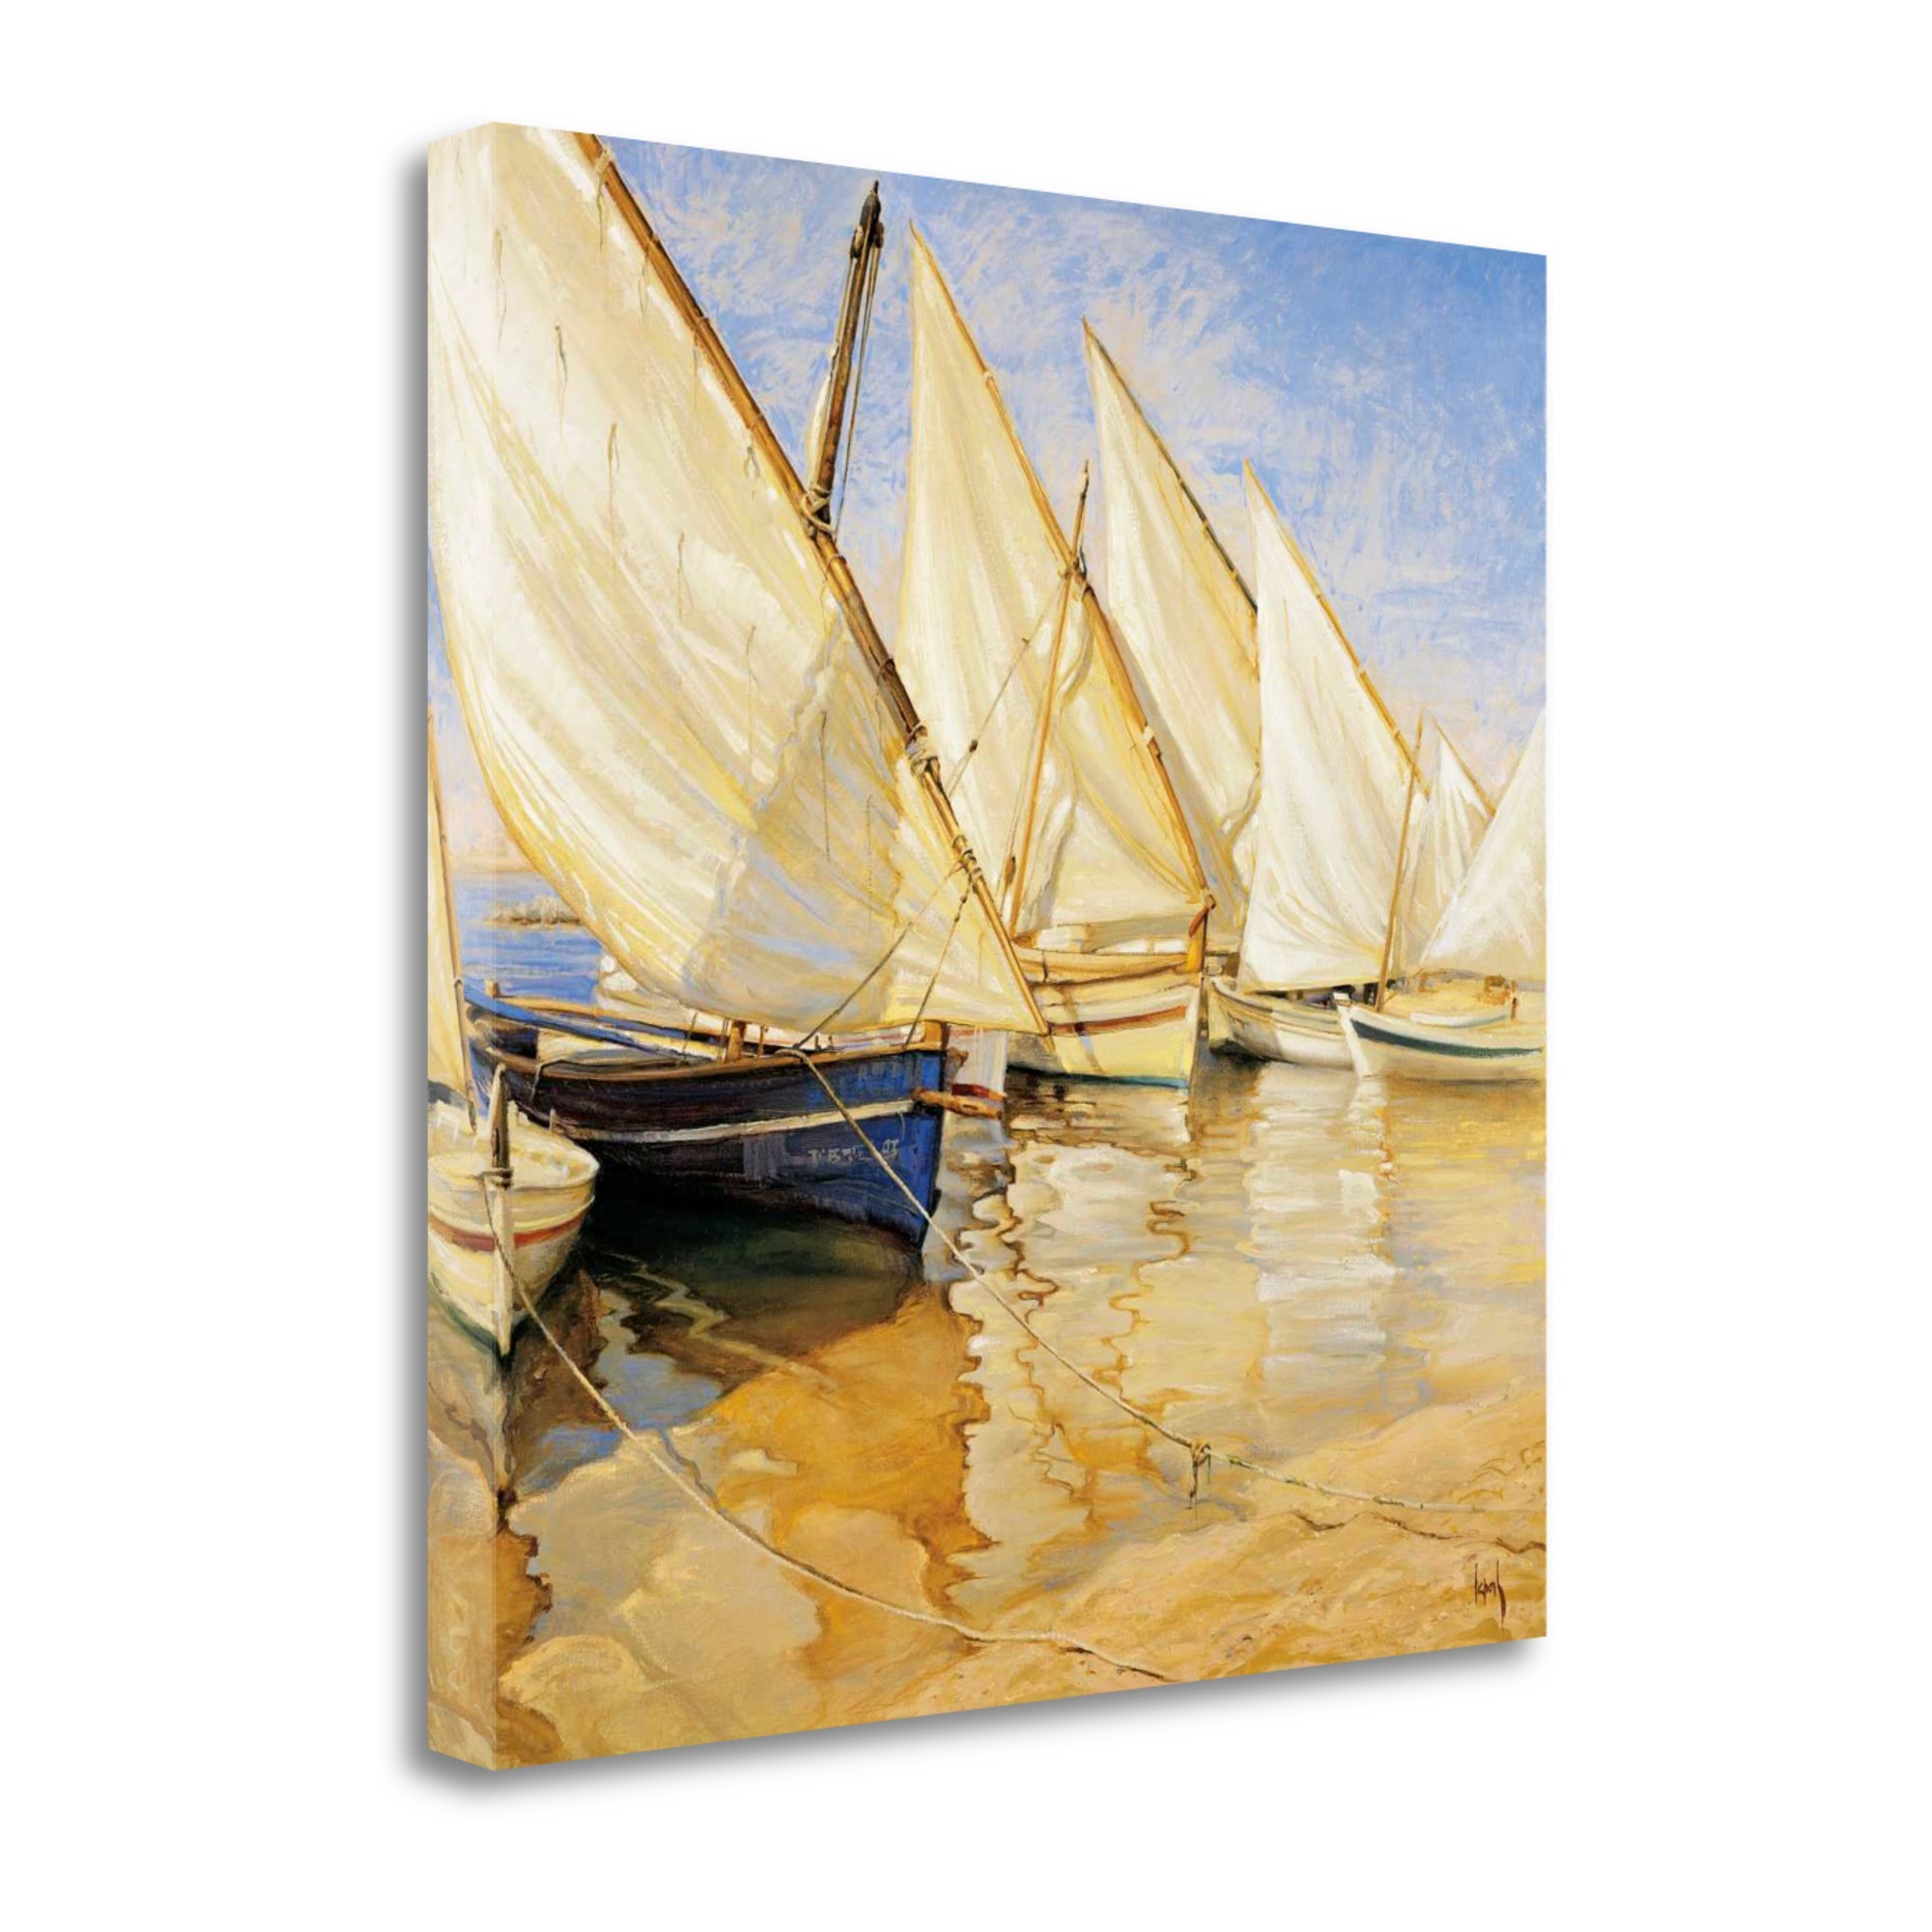 35" Fleet of Boats with Open White Sails Giclee Wrap Canvas Wall Art